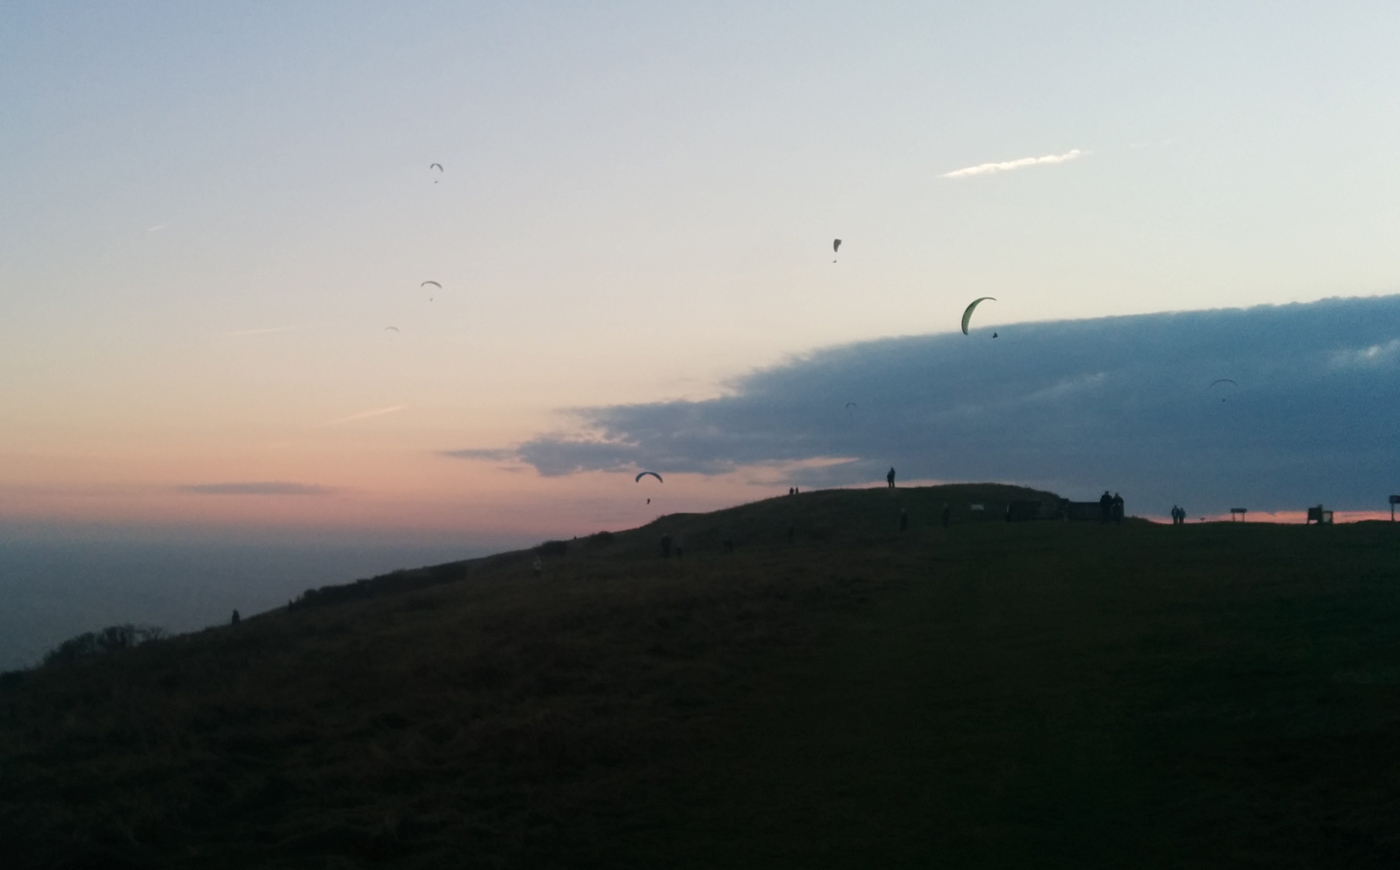 Paragliders still out